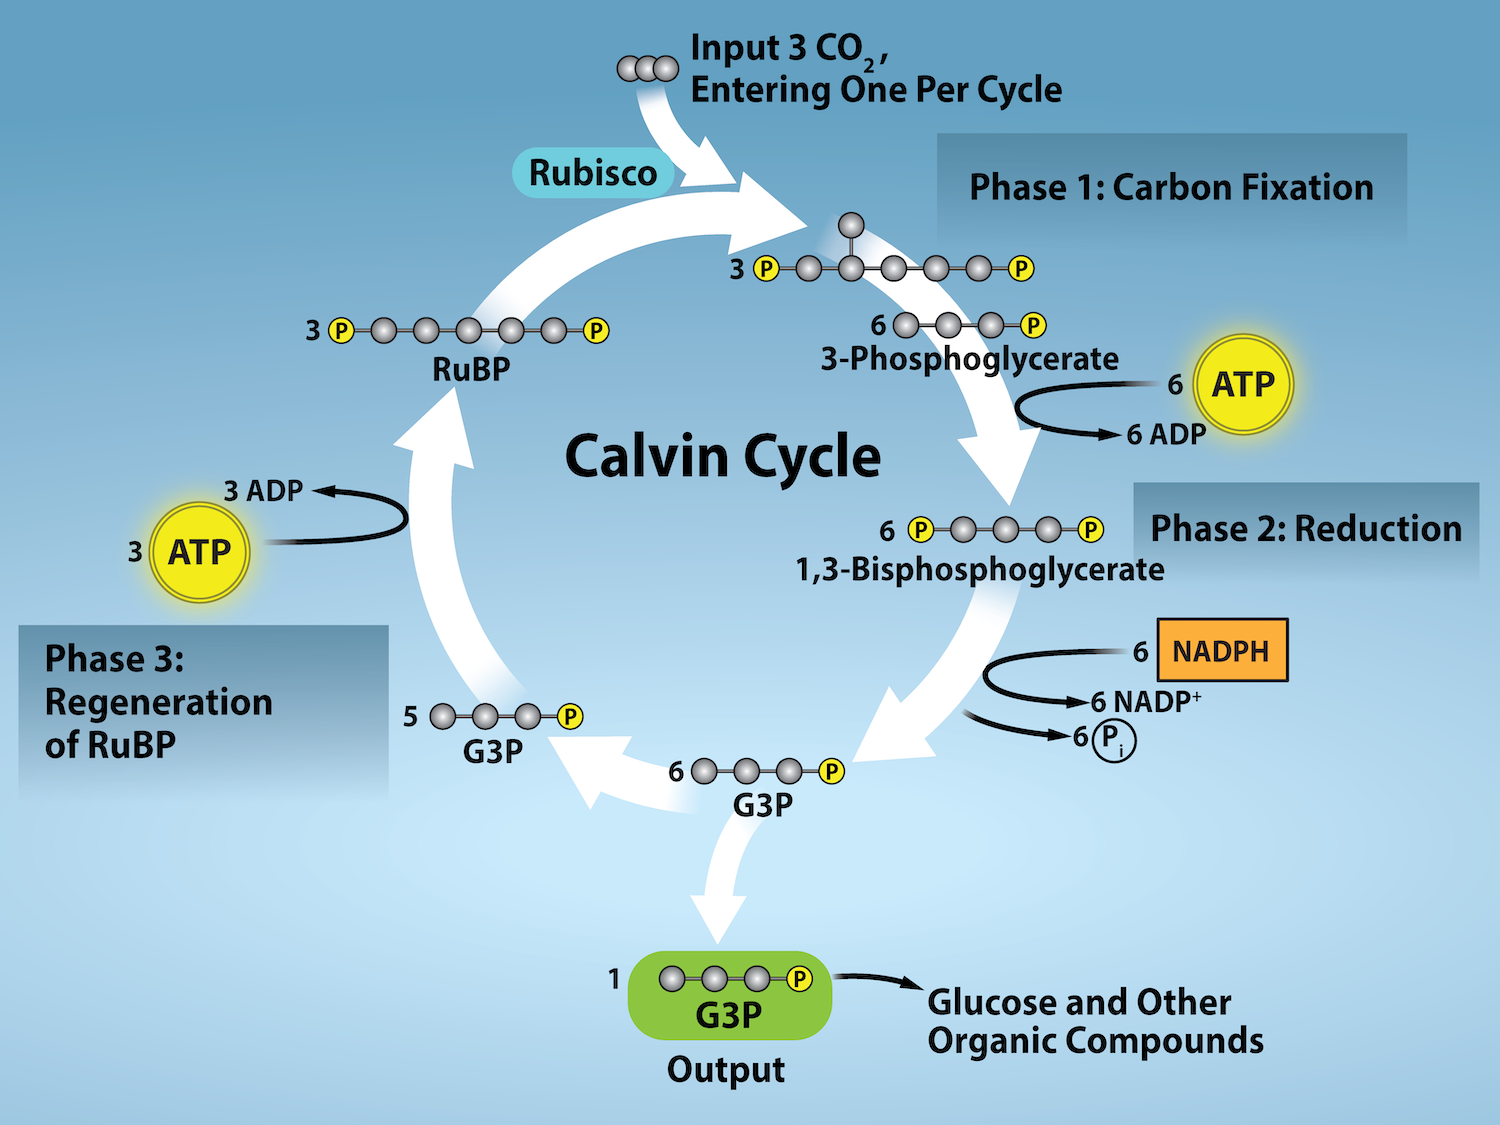 A diagram of the Calvin cycle is shown with its three stages: carbon fixation, 3 dash P G A reduction, and regeneration of upper case R lower case u upper case B upper case P. In stage 1, the enzyme upper R lower u upper B lower i lower s upper C upper O adds a carbon dioxide to the five-carbon molecule upper R lower u upper B upper P, producing two three-carbon 3 dash PGA molecules. In stage 2, two N A D P H and two A T P are used to reduce 3 dash PGA to G A 3 P. In stage 3 upper R lower u upper B upper P is regenerated from G A 3 P. One A T P is used in the process. Three complete cycles produces one new G A 3 P, which is shunted out of the cycle and made into glucose, whose moledular formula is upper C subscript 6 baseline upper H subscript 12 baseline upper O subscript 6 baseline.